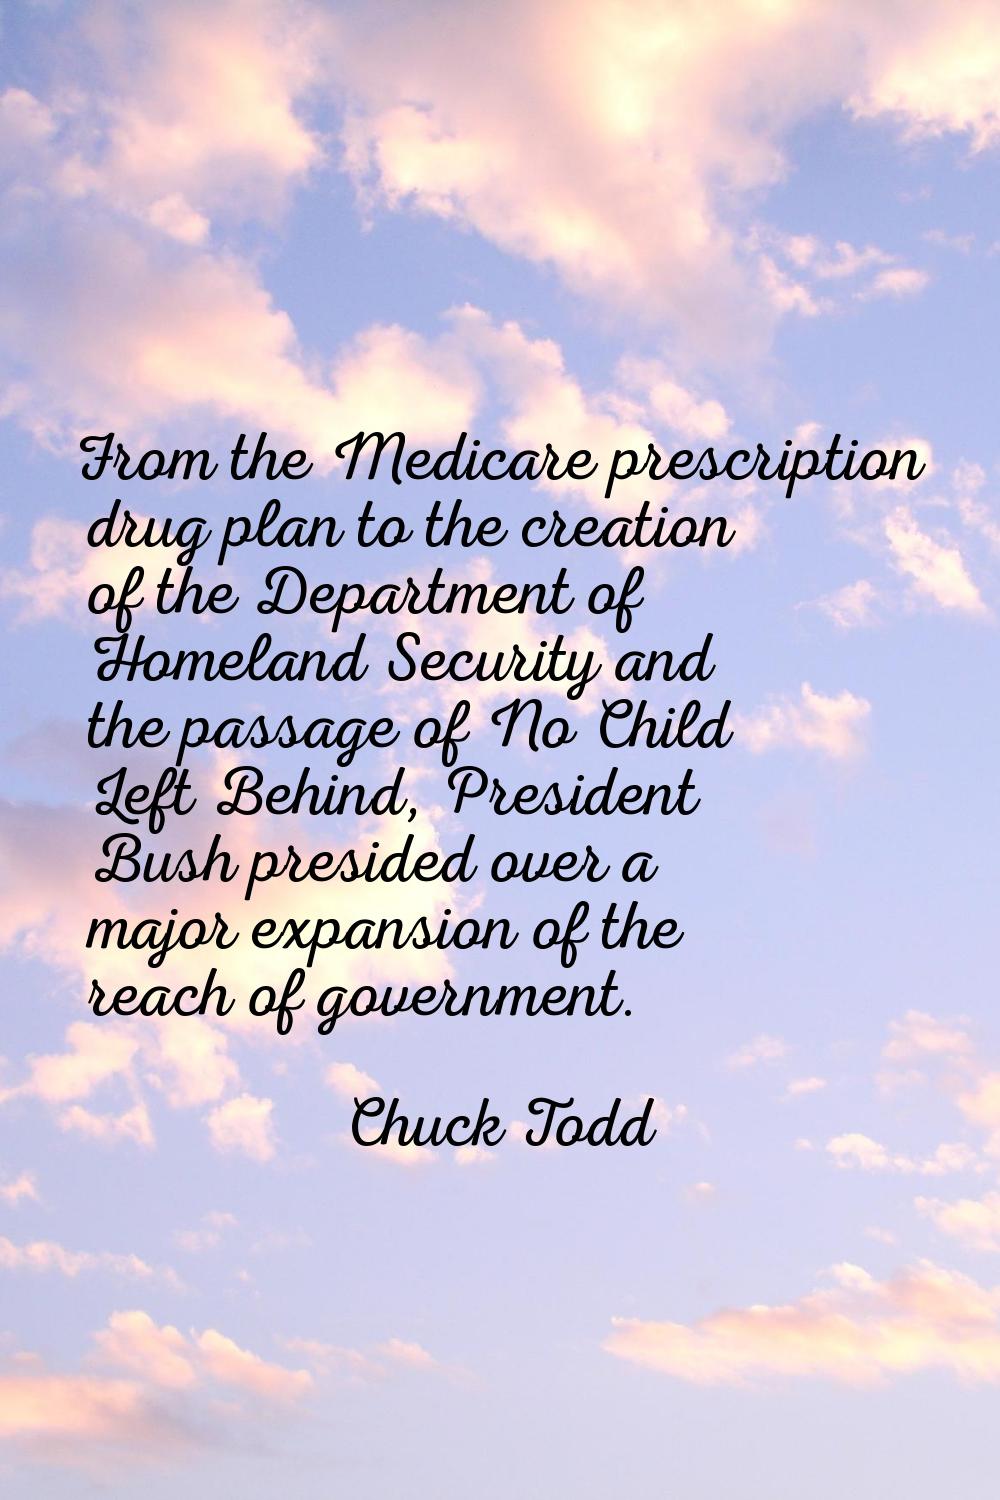 From the Medicare prescription drug plan to the creation of the Department of Homeland Security and